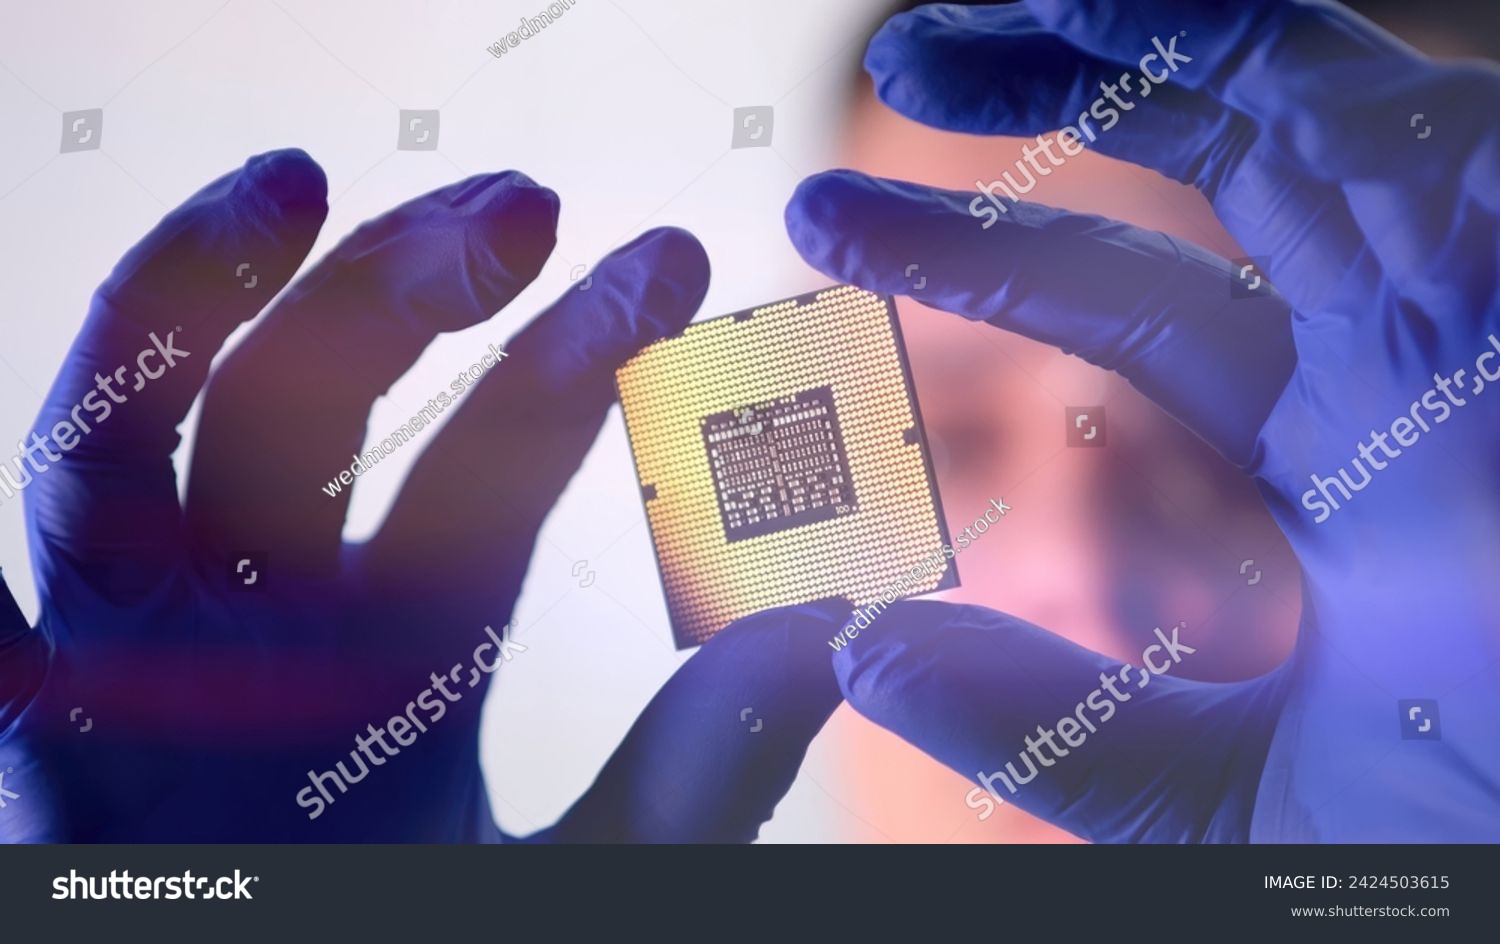 The scientist works in a modern scientific laboratory for the research and development of microelectronics and processors. Microprocessor manufacturing worker uses computer technology and equipment. #2424503615